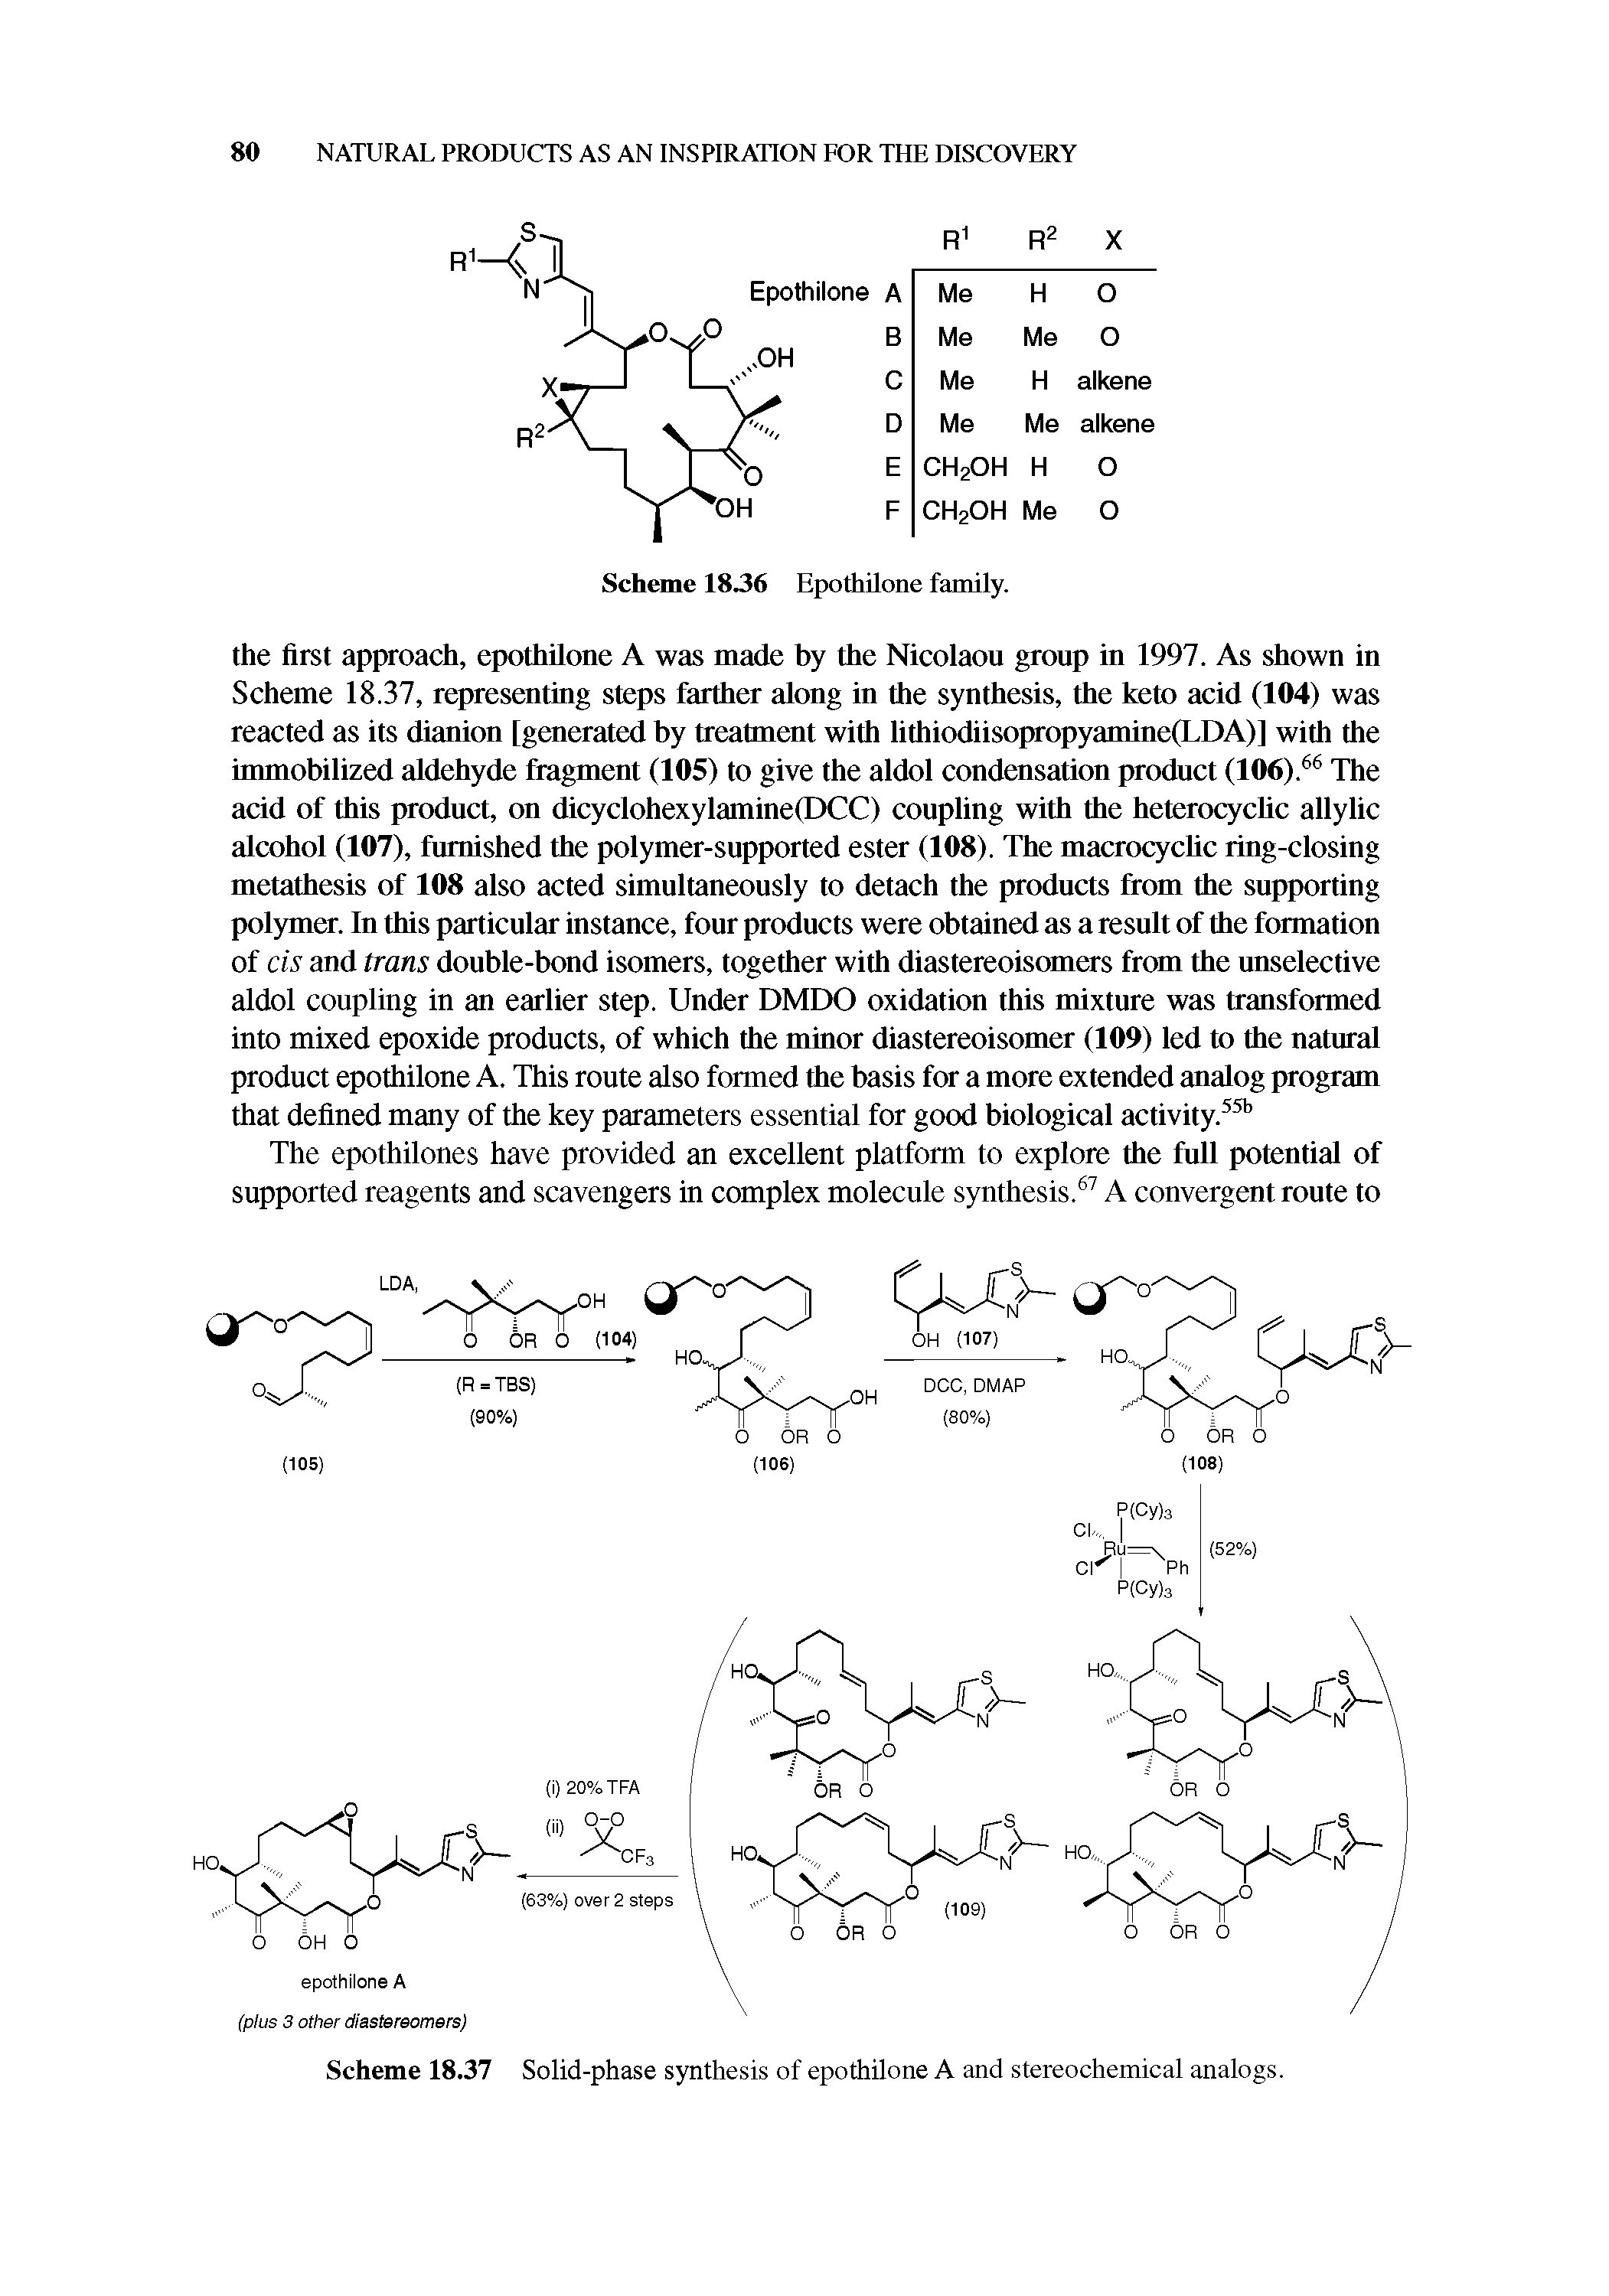 Scheme 18.37 Solid-phase synthesis of epothilone A and stereochemical analogs.